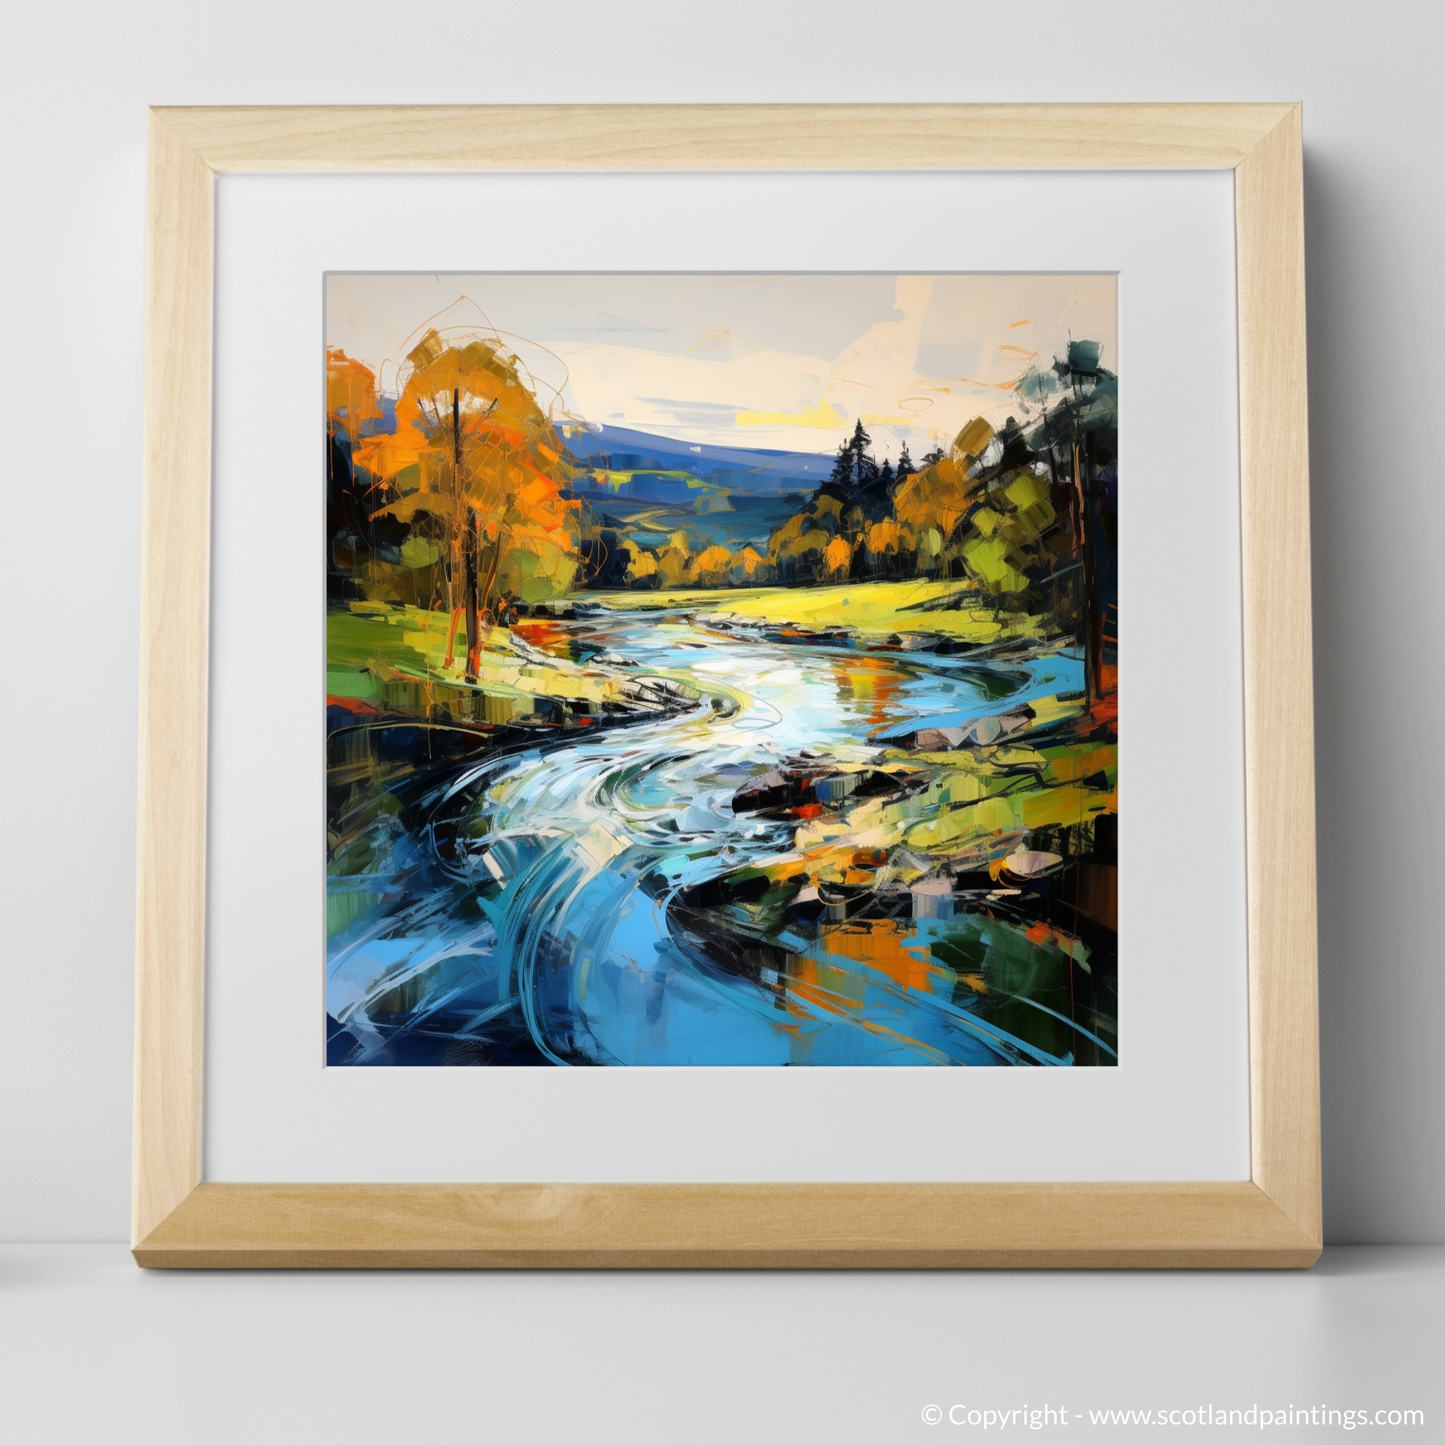 Art Print of River Lyon, Perthshire with a natural frame